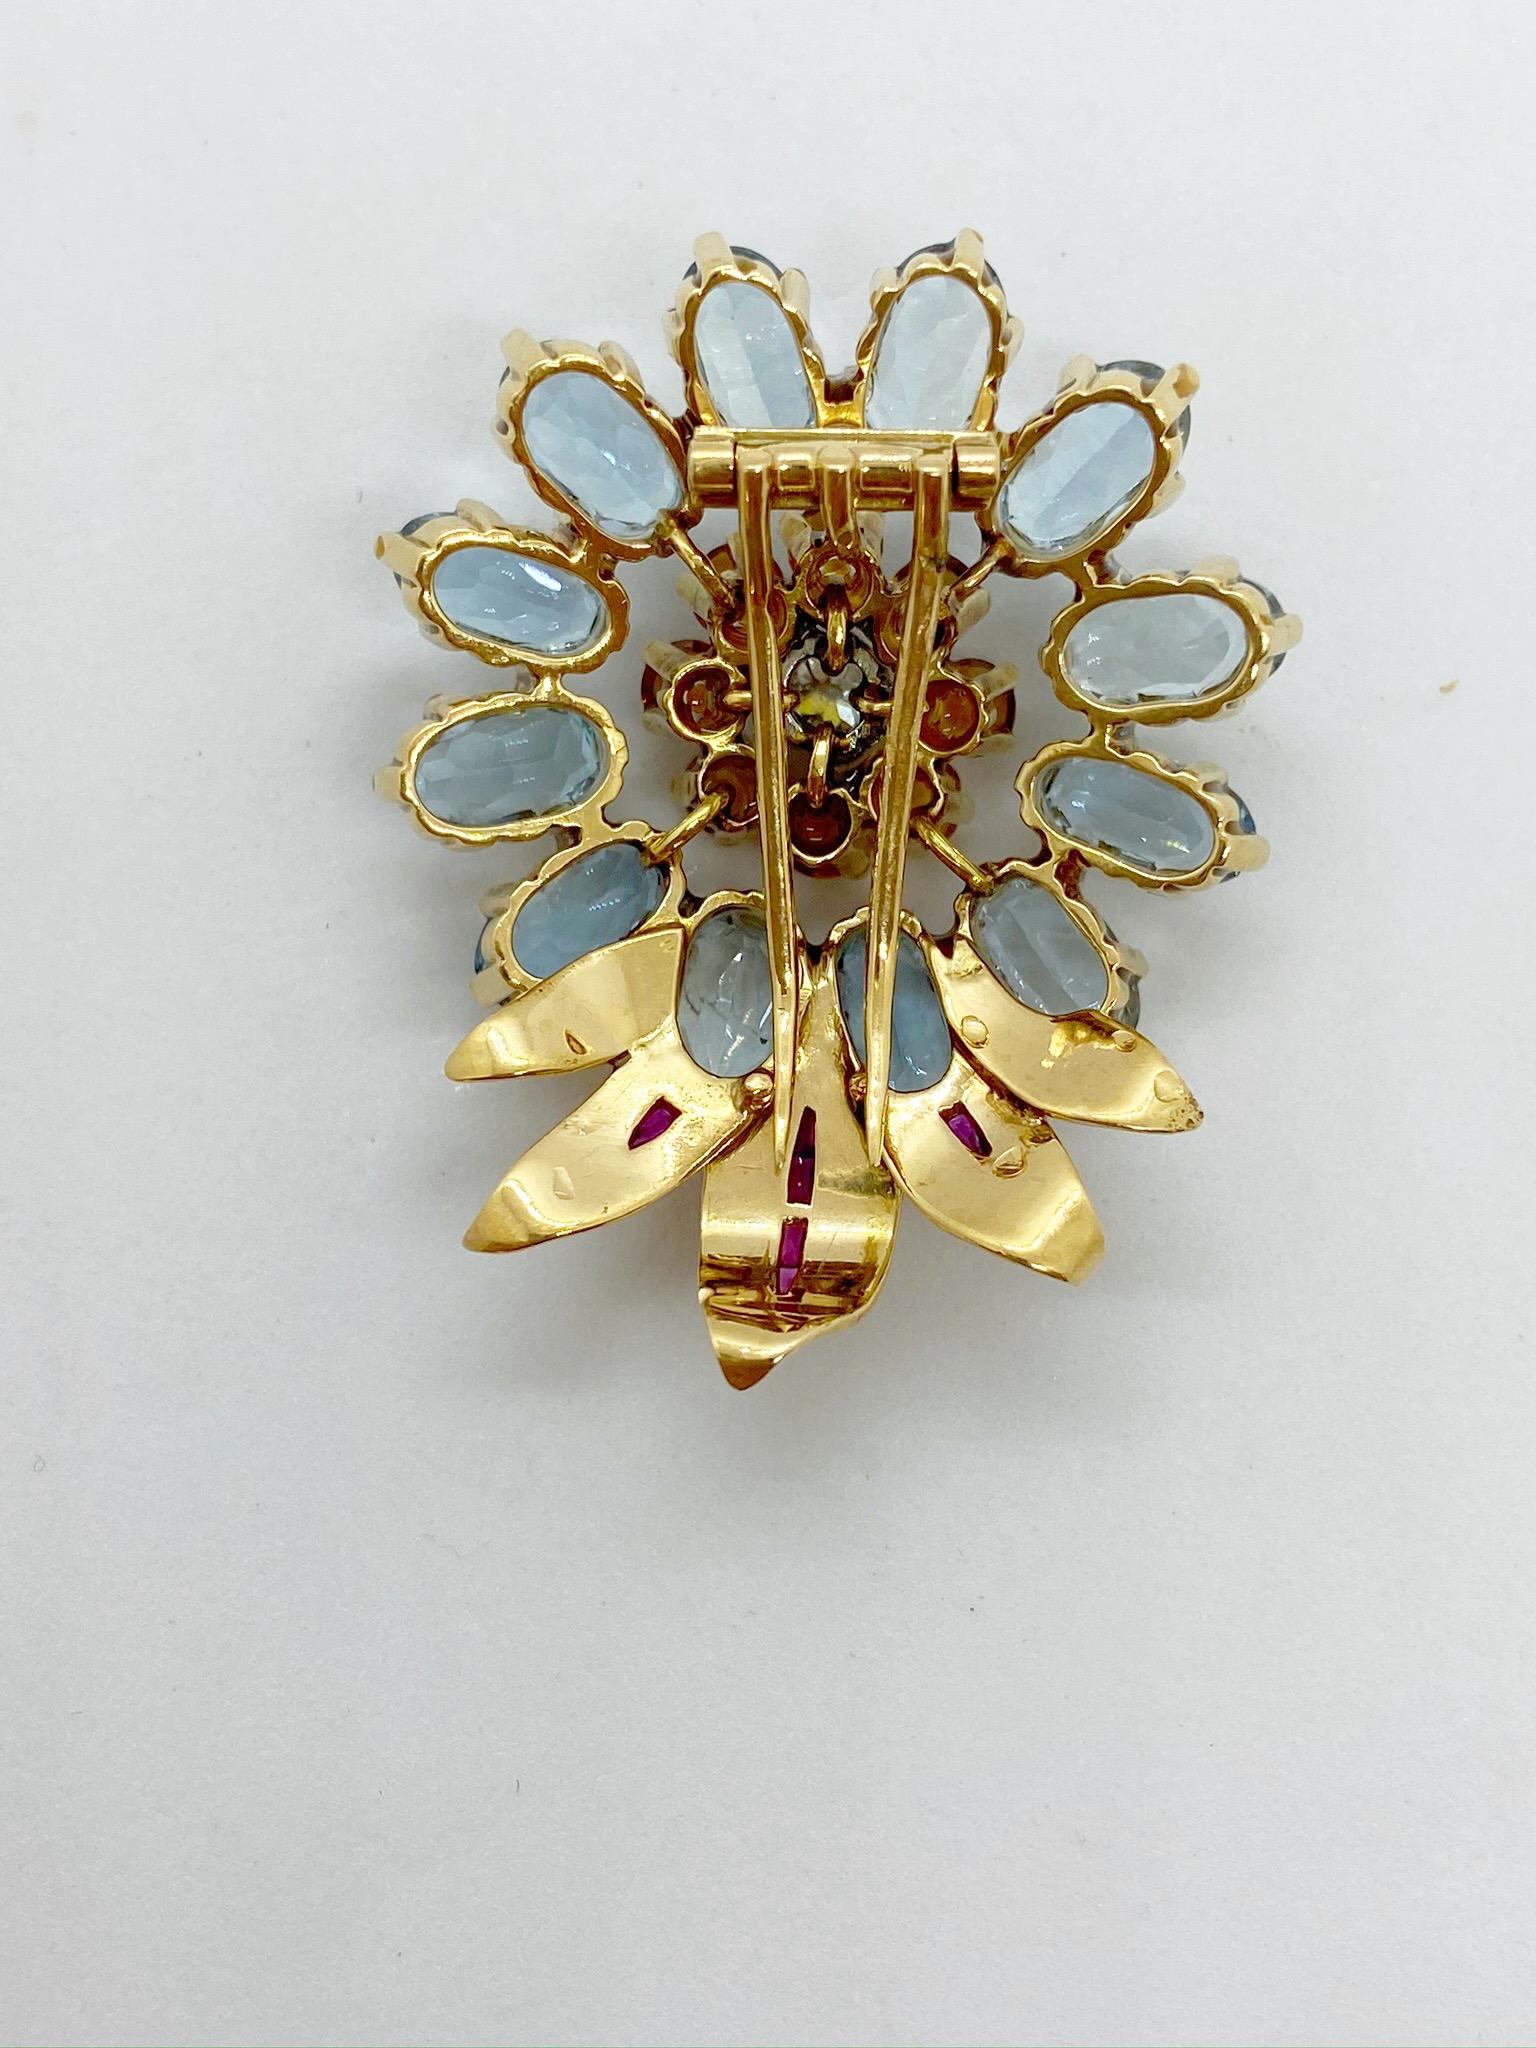 Vintage 14KT Gold Floral Brooch with Aquamarine, Citrine, & Diamond, circa 1940s In Excellent Condition For Sale In New York, NY